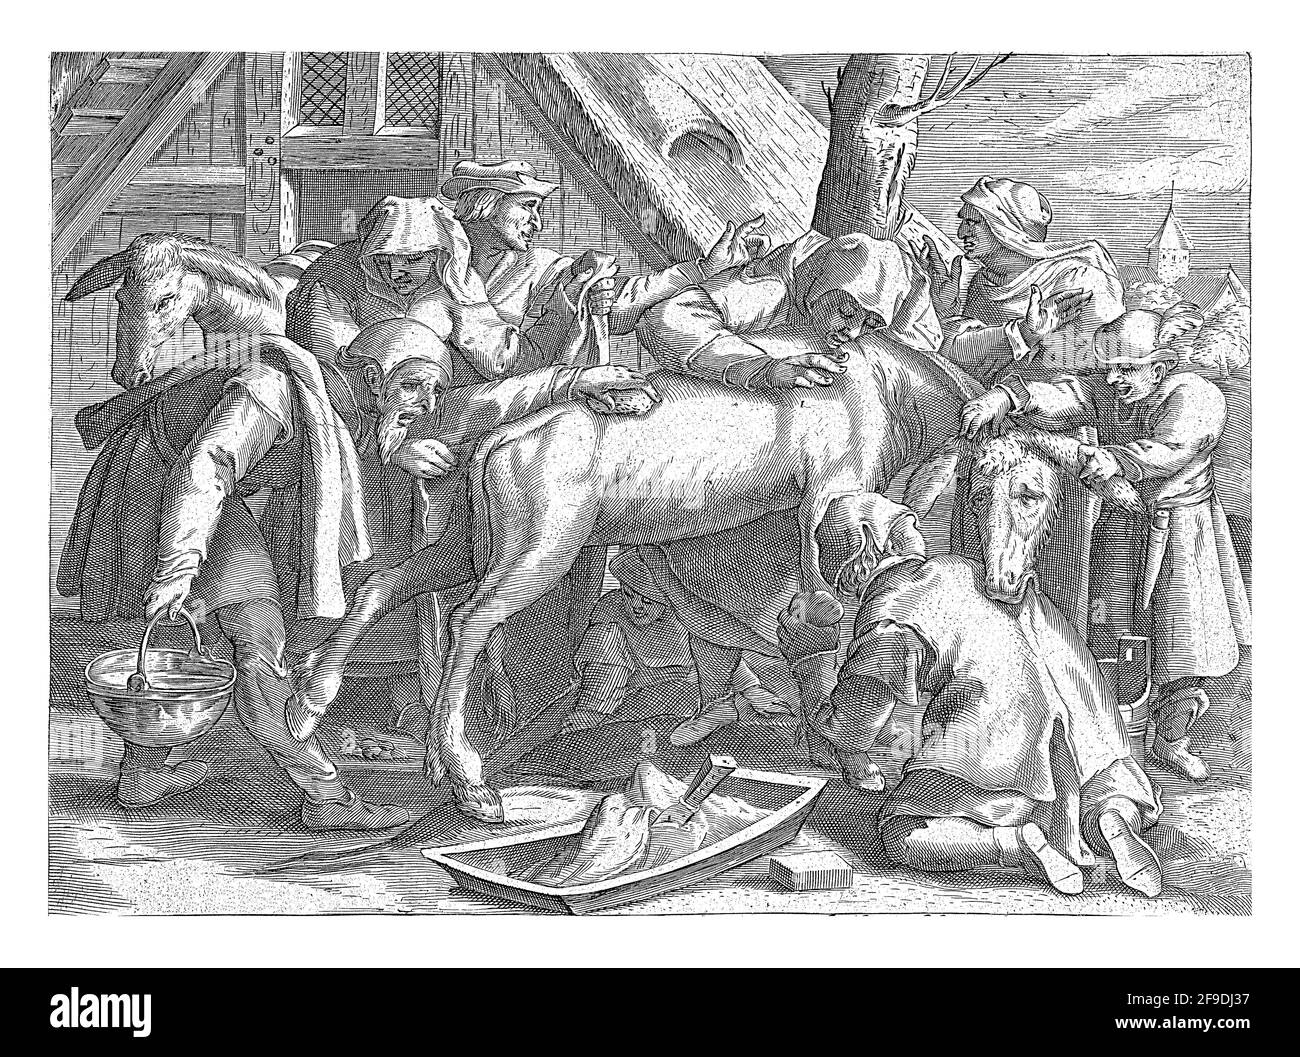 A group of men try to wash a donkey. The men are busy with buckets, soap and cloths. They are not thanked for it. The donkey kicks its legs and bites Stock Photo